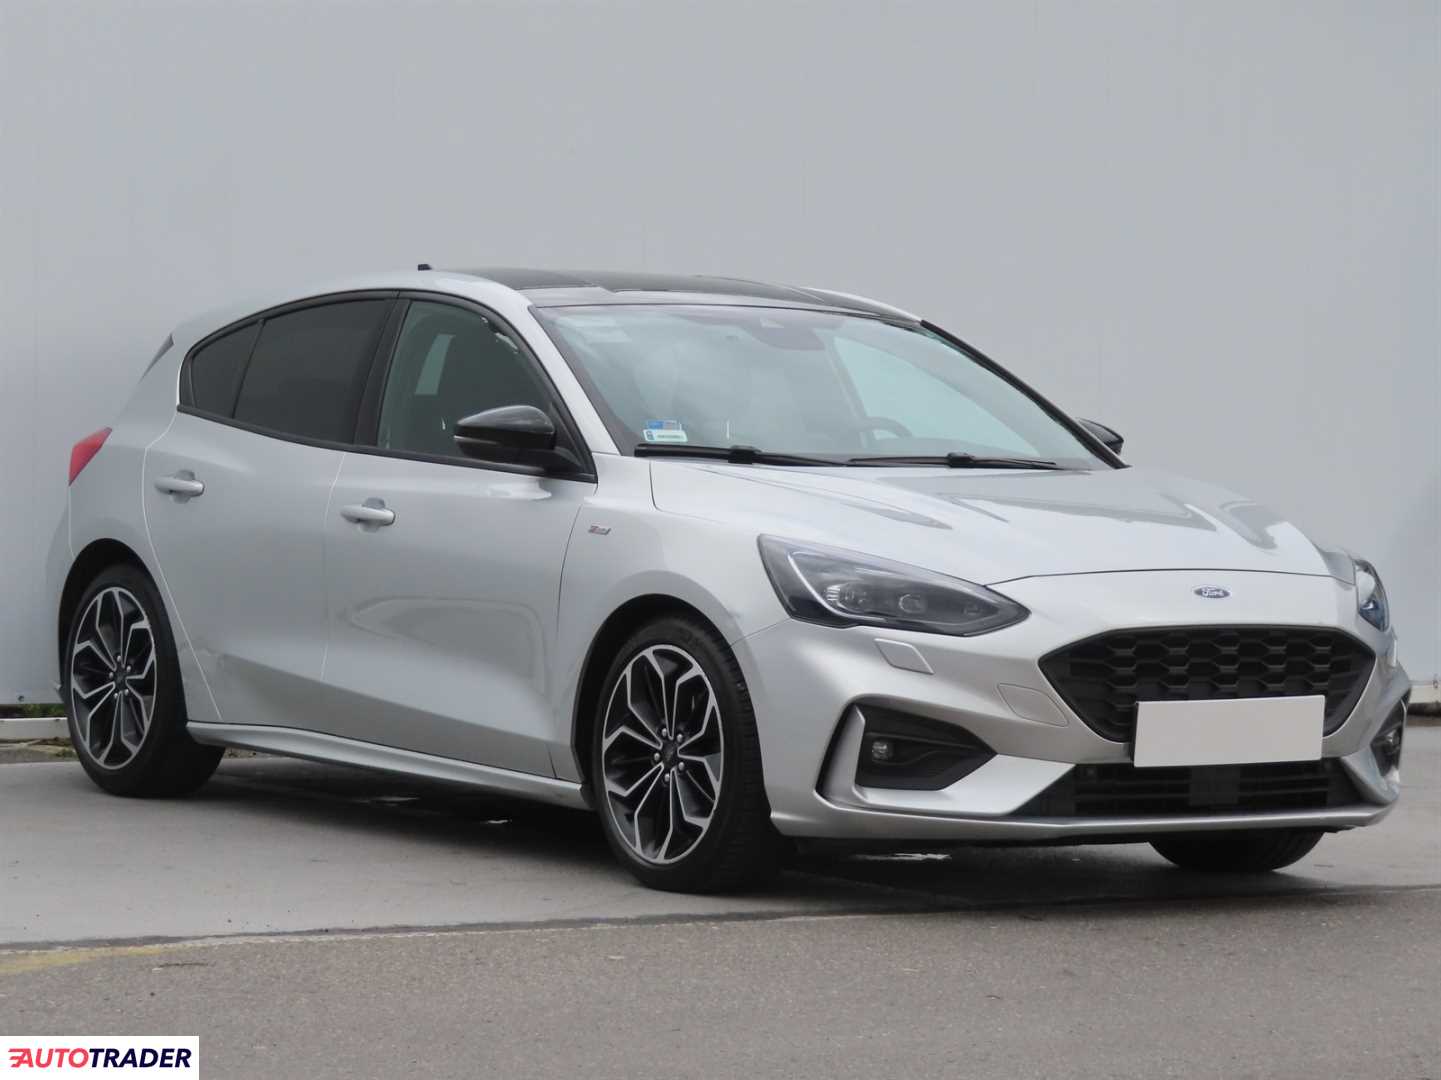 Ford Focus 2018 1.5 147 KM